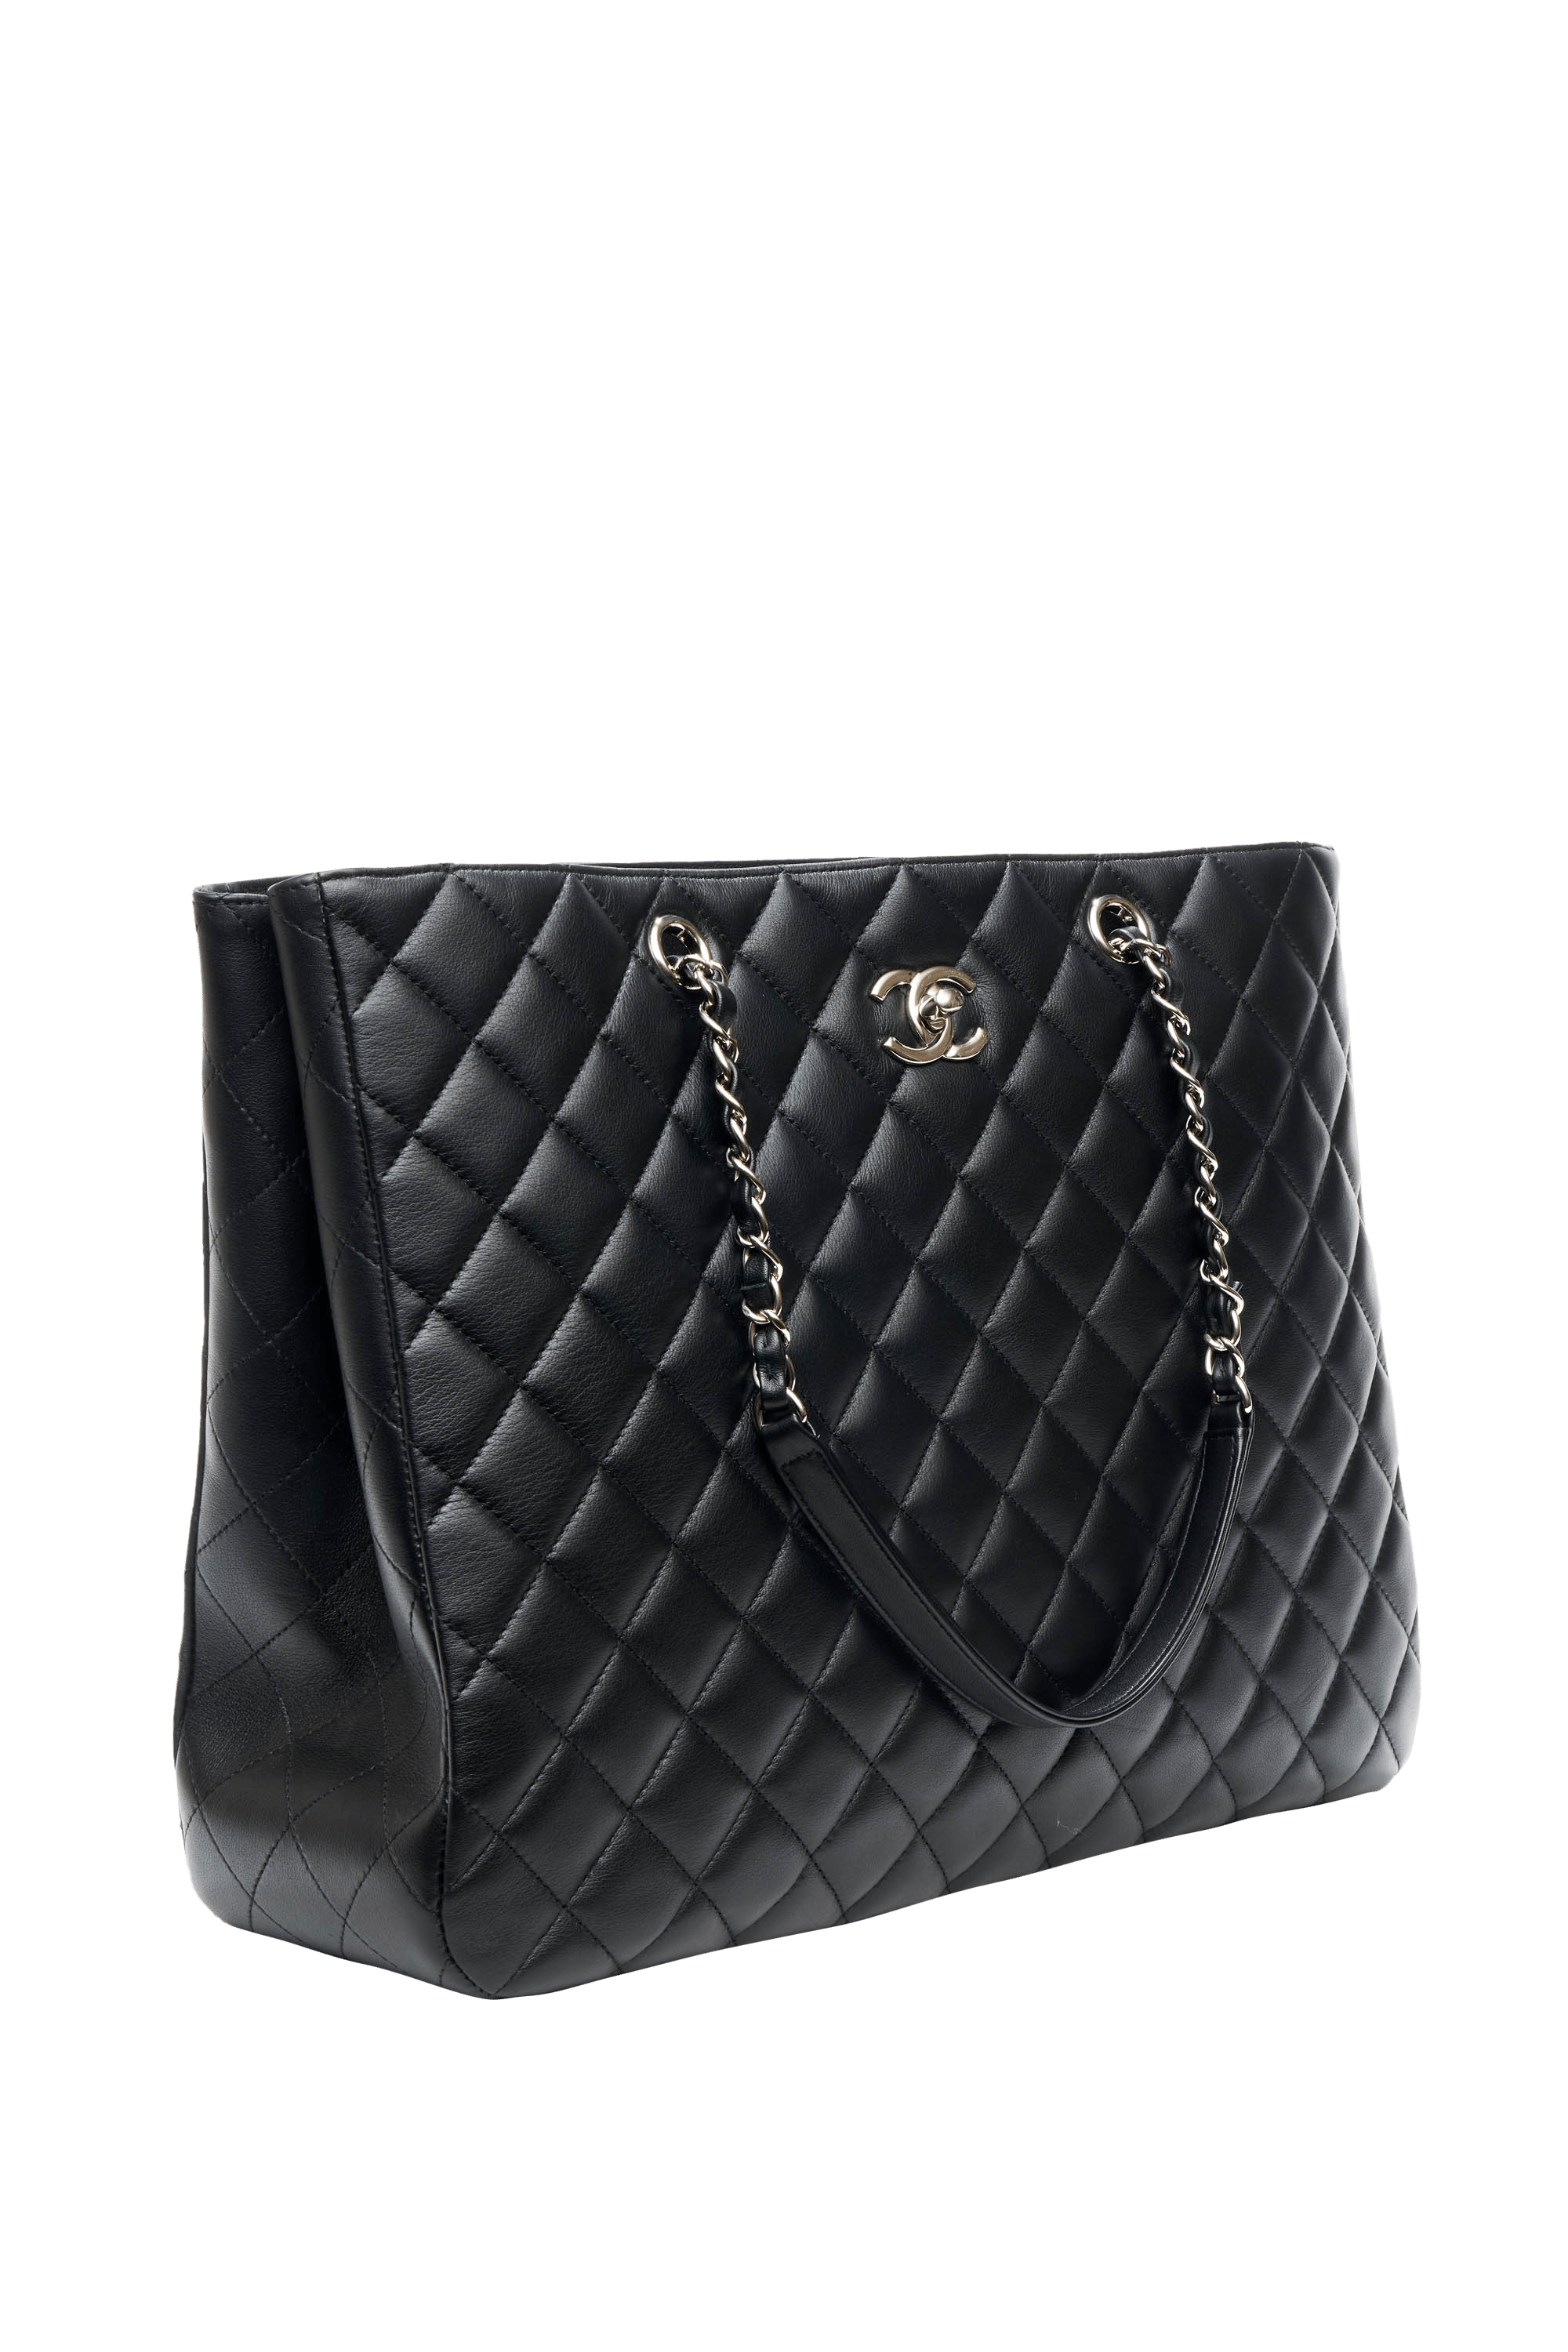 Chanel Black Timeless Tote L - Foxy Couture Carmel